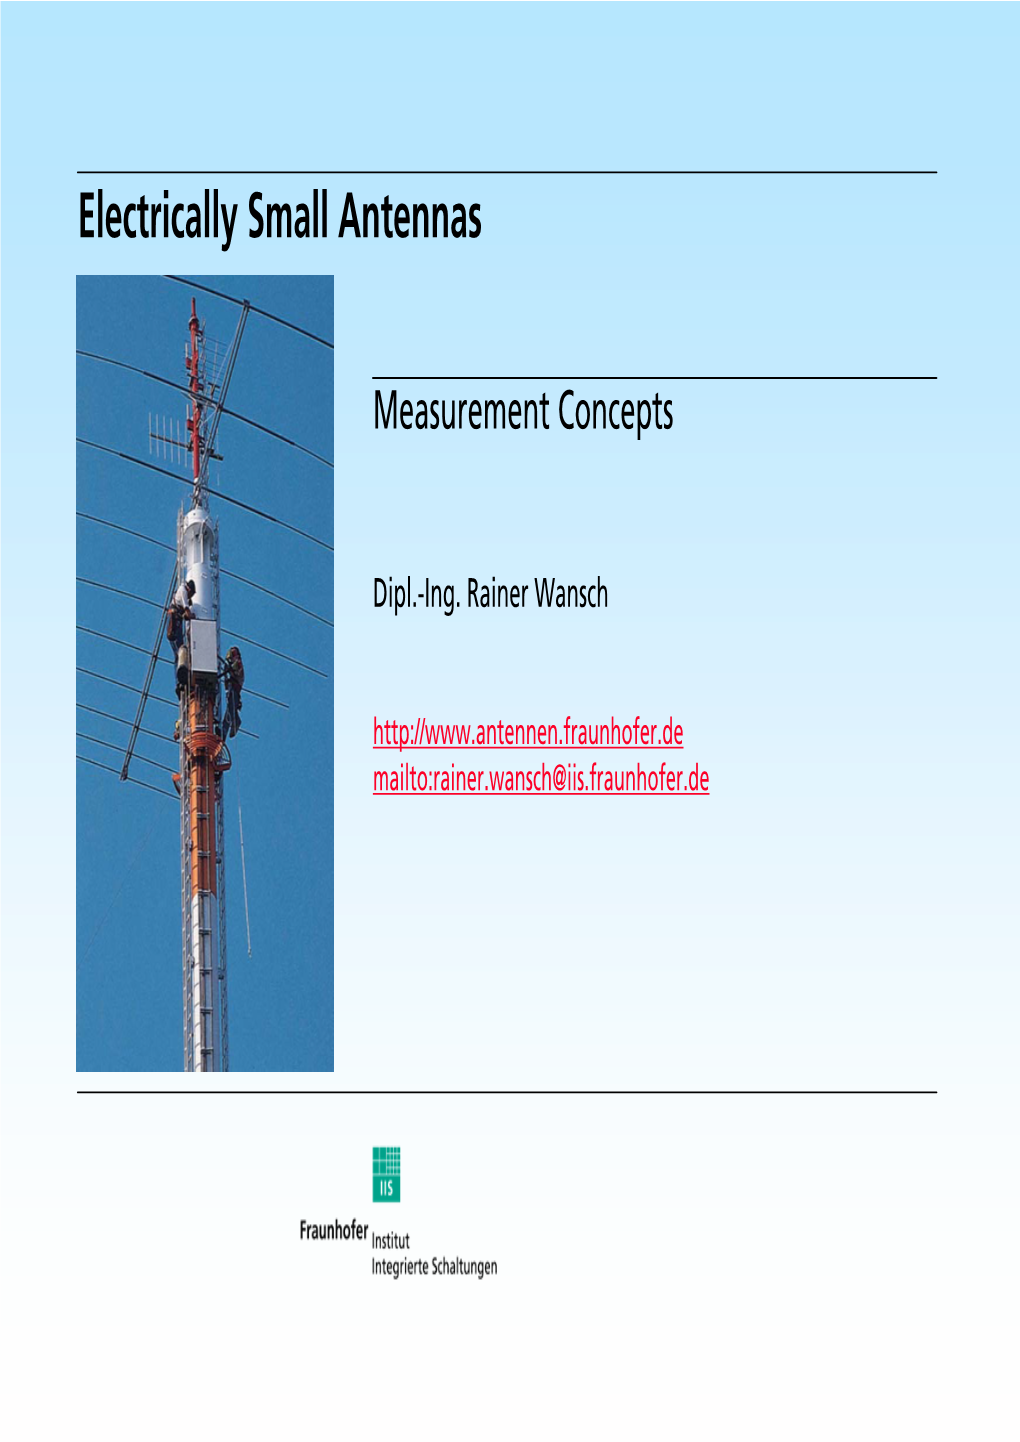 Measurement of Electrically Small Antennas